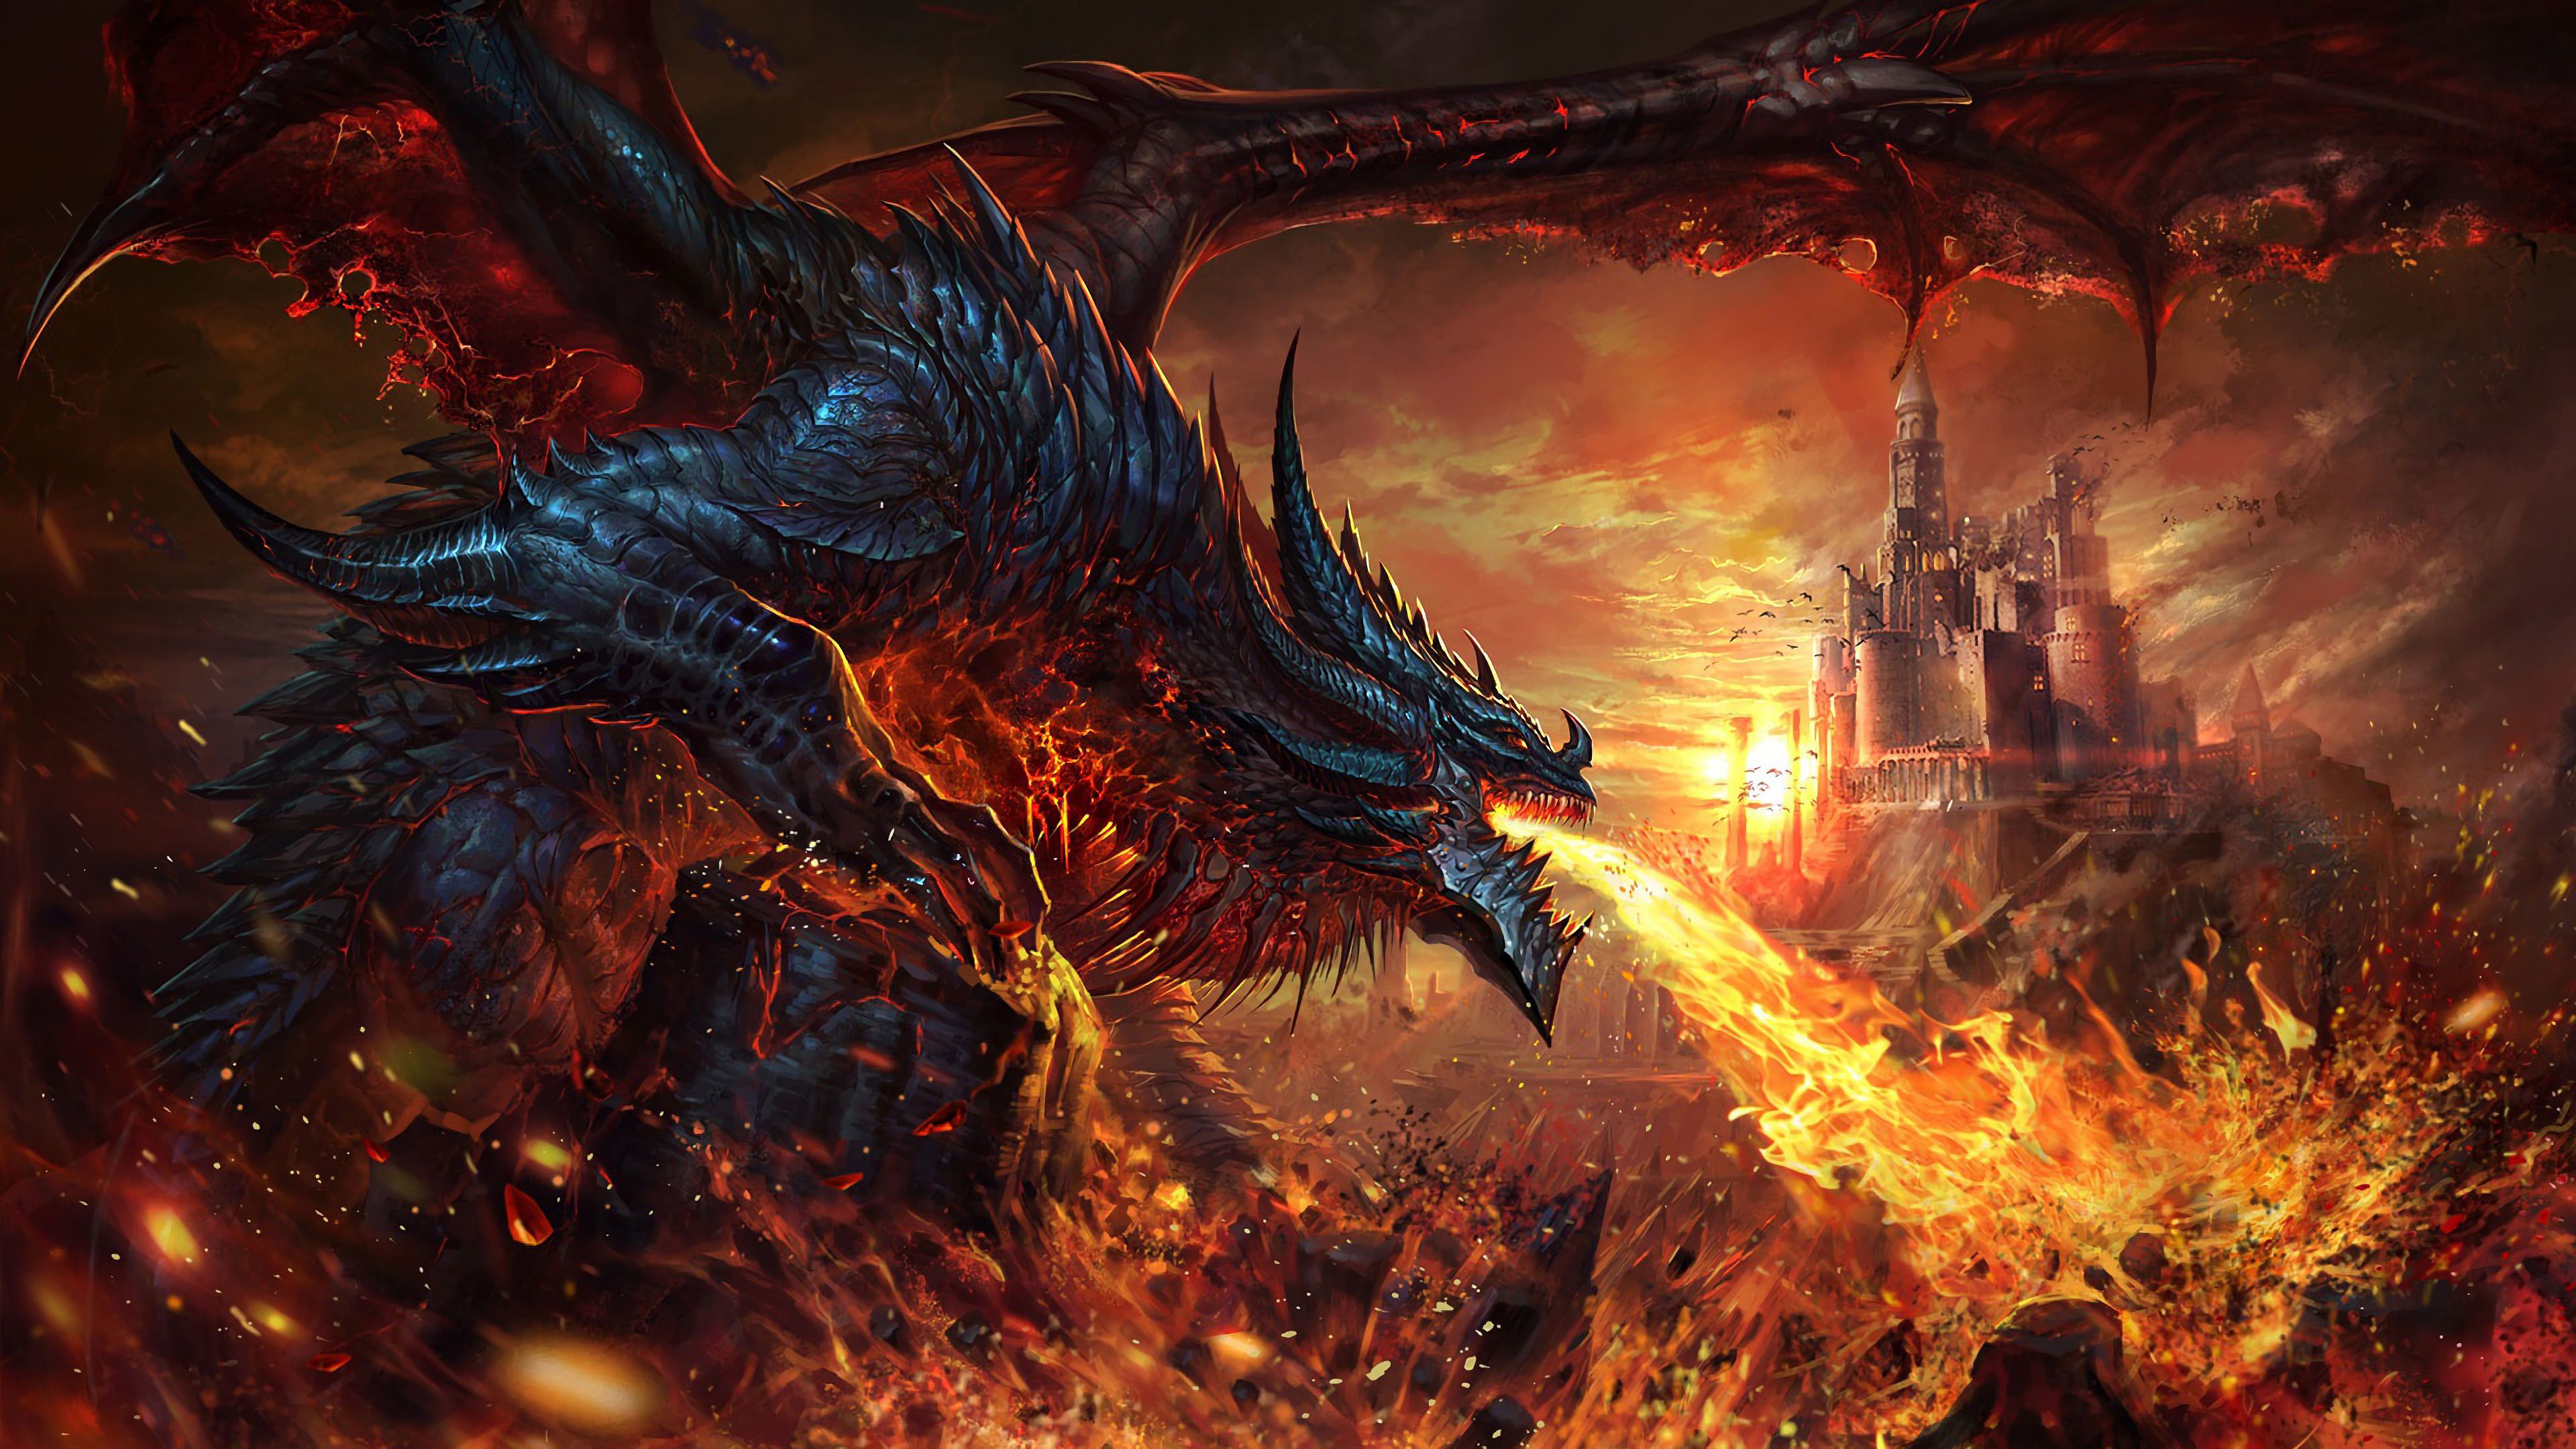 Fire Breathing Dragon Wallpapers - Wallpaper Cave